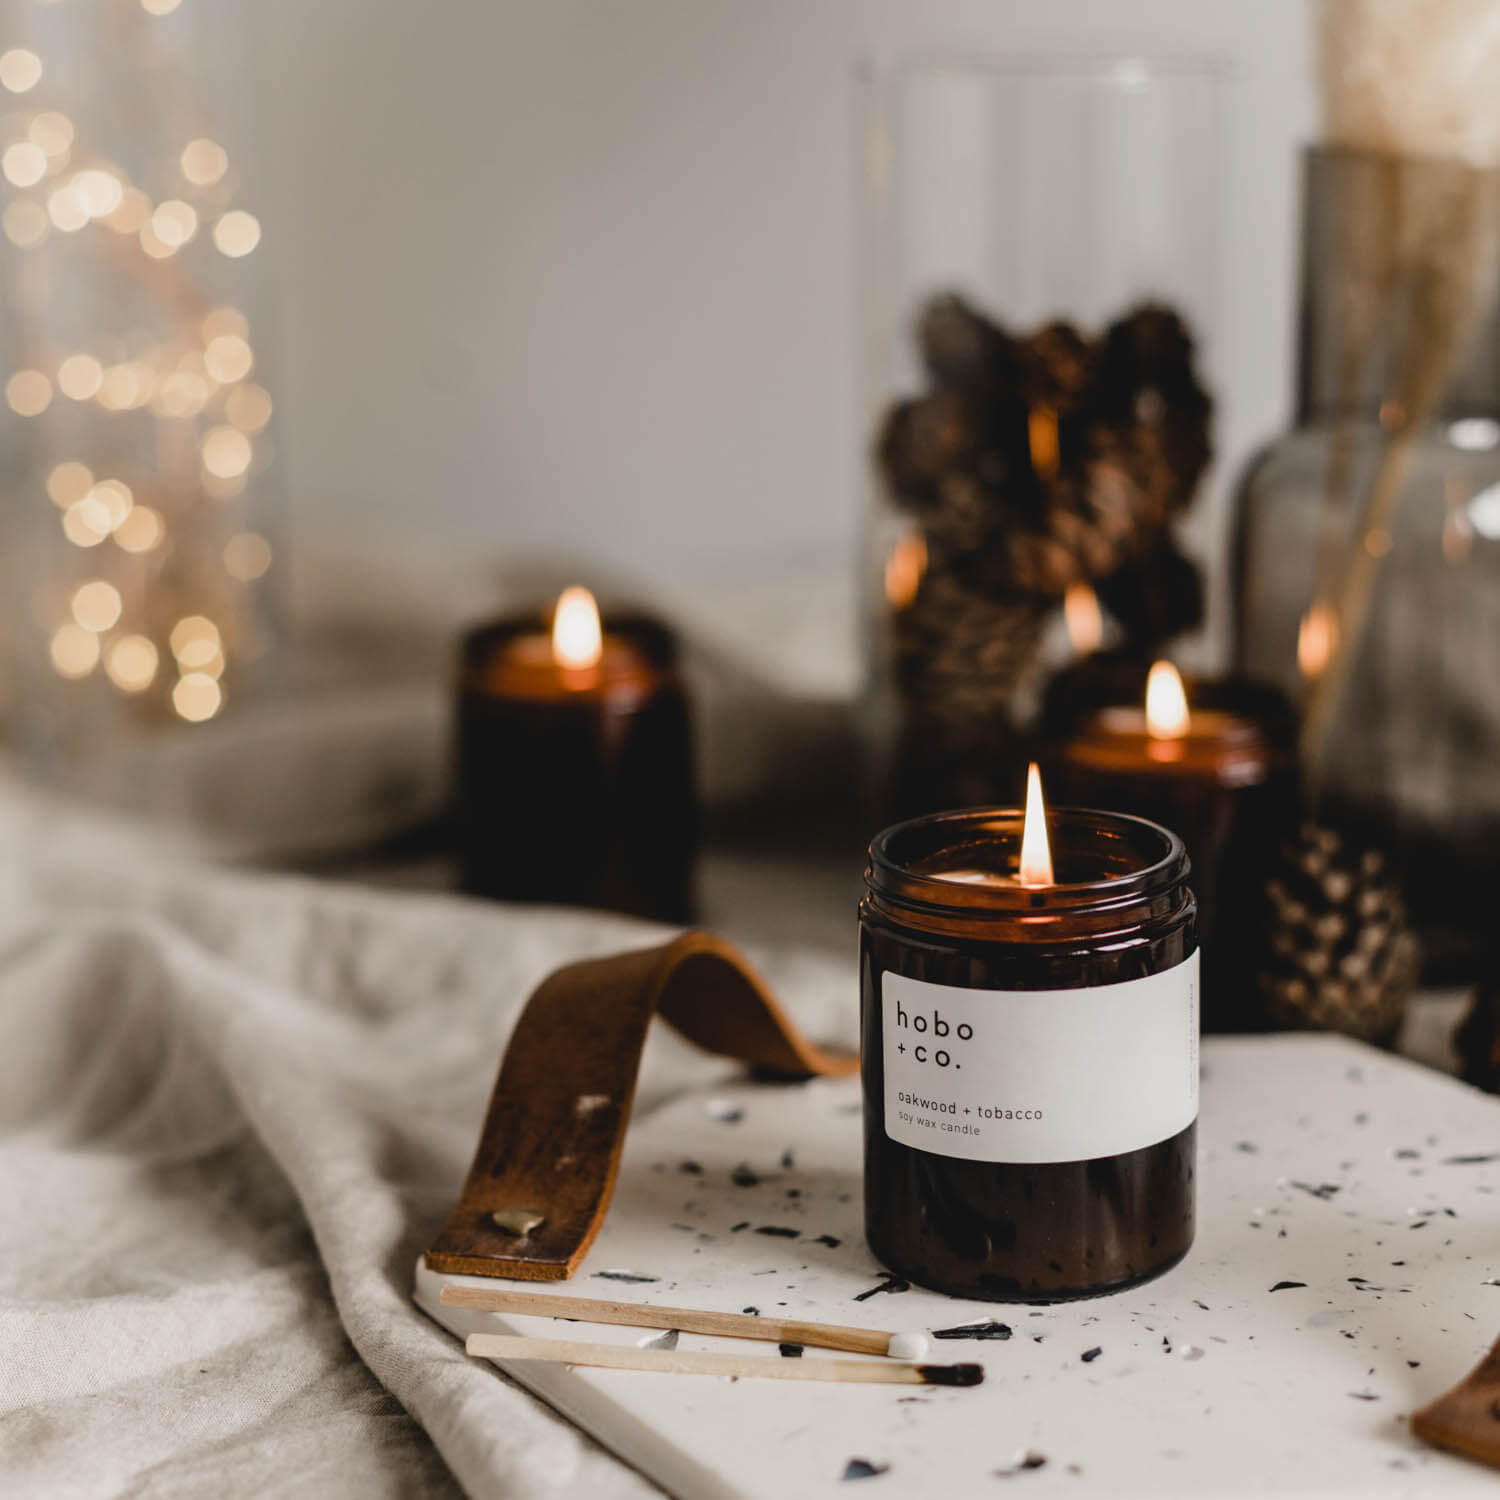 Oakwood & Tobacco Scented Candle by Hobo & Co.